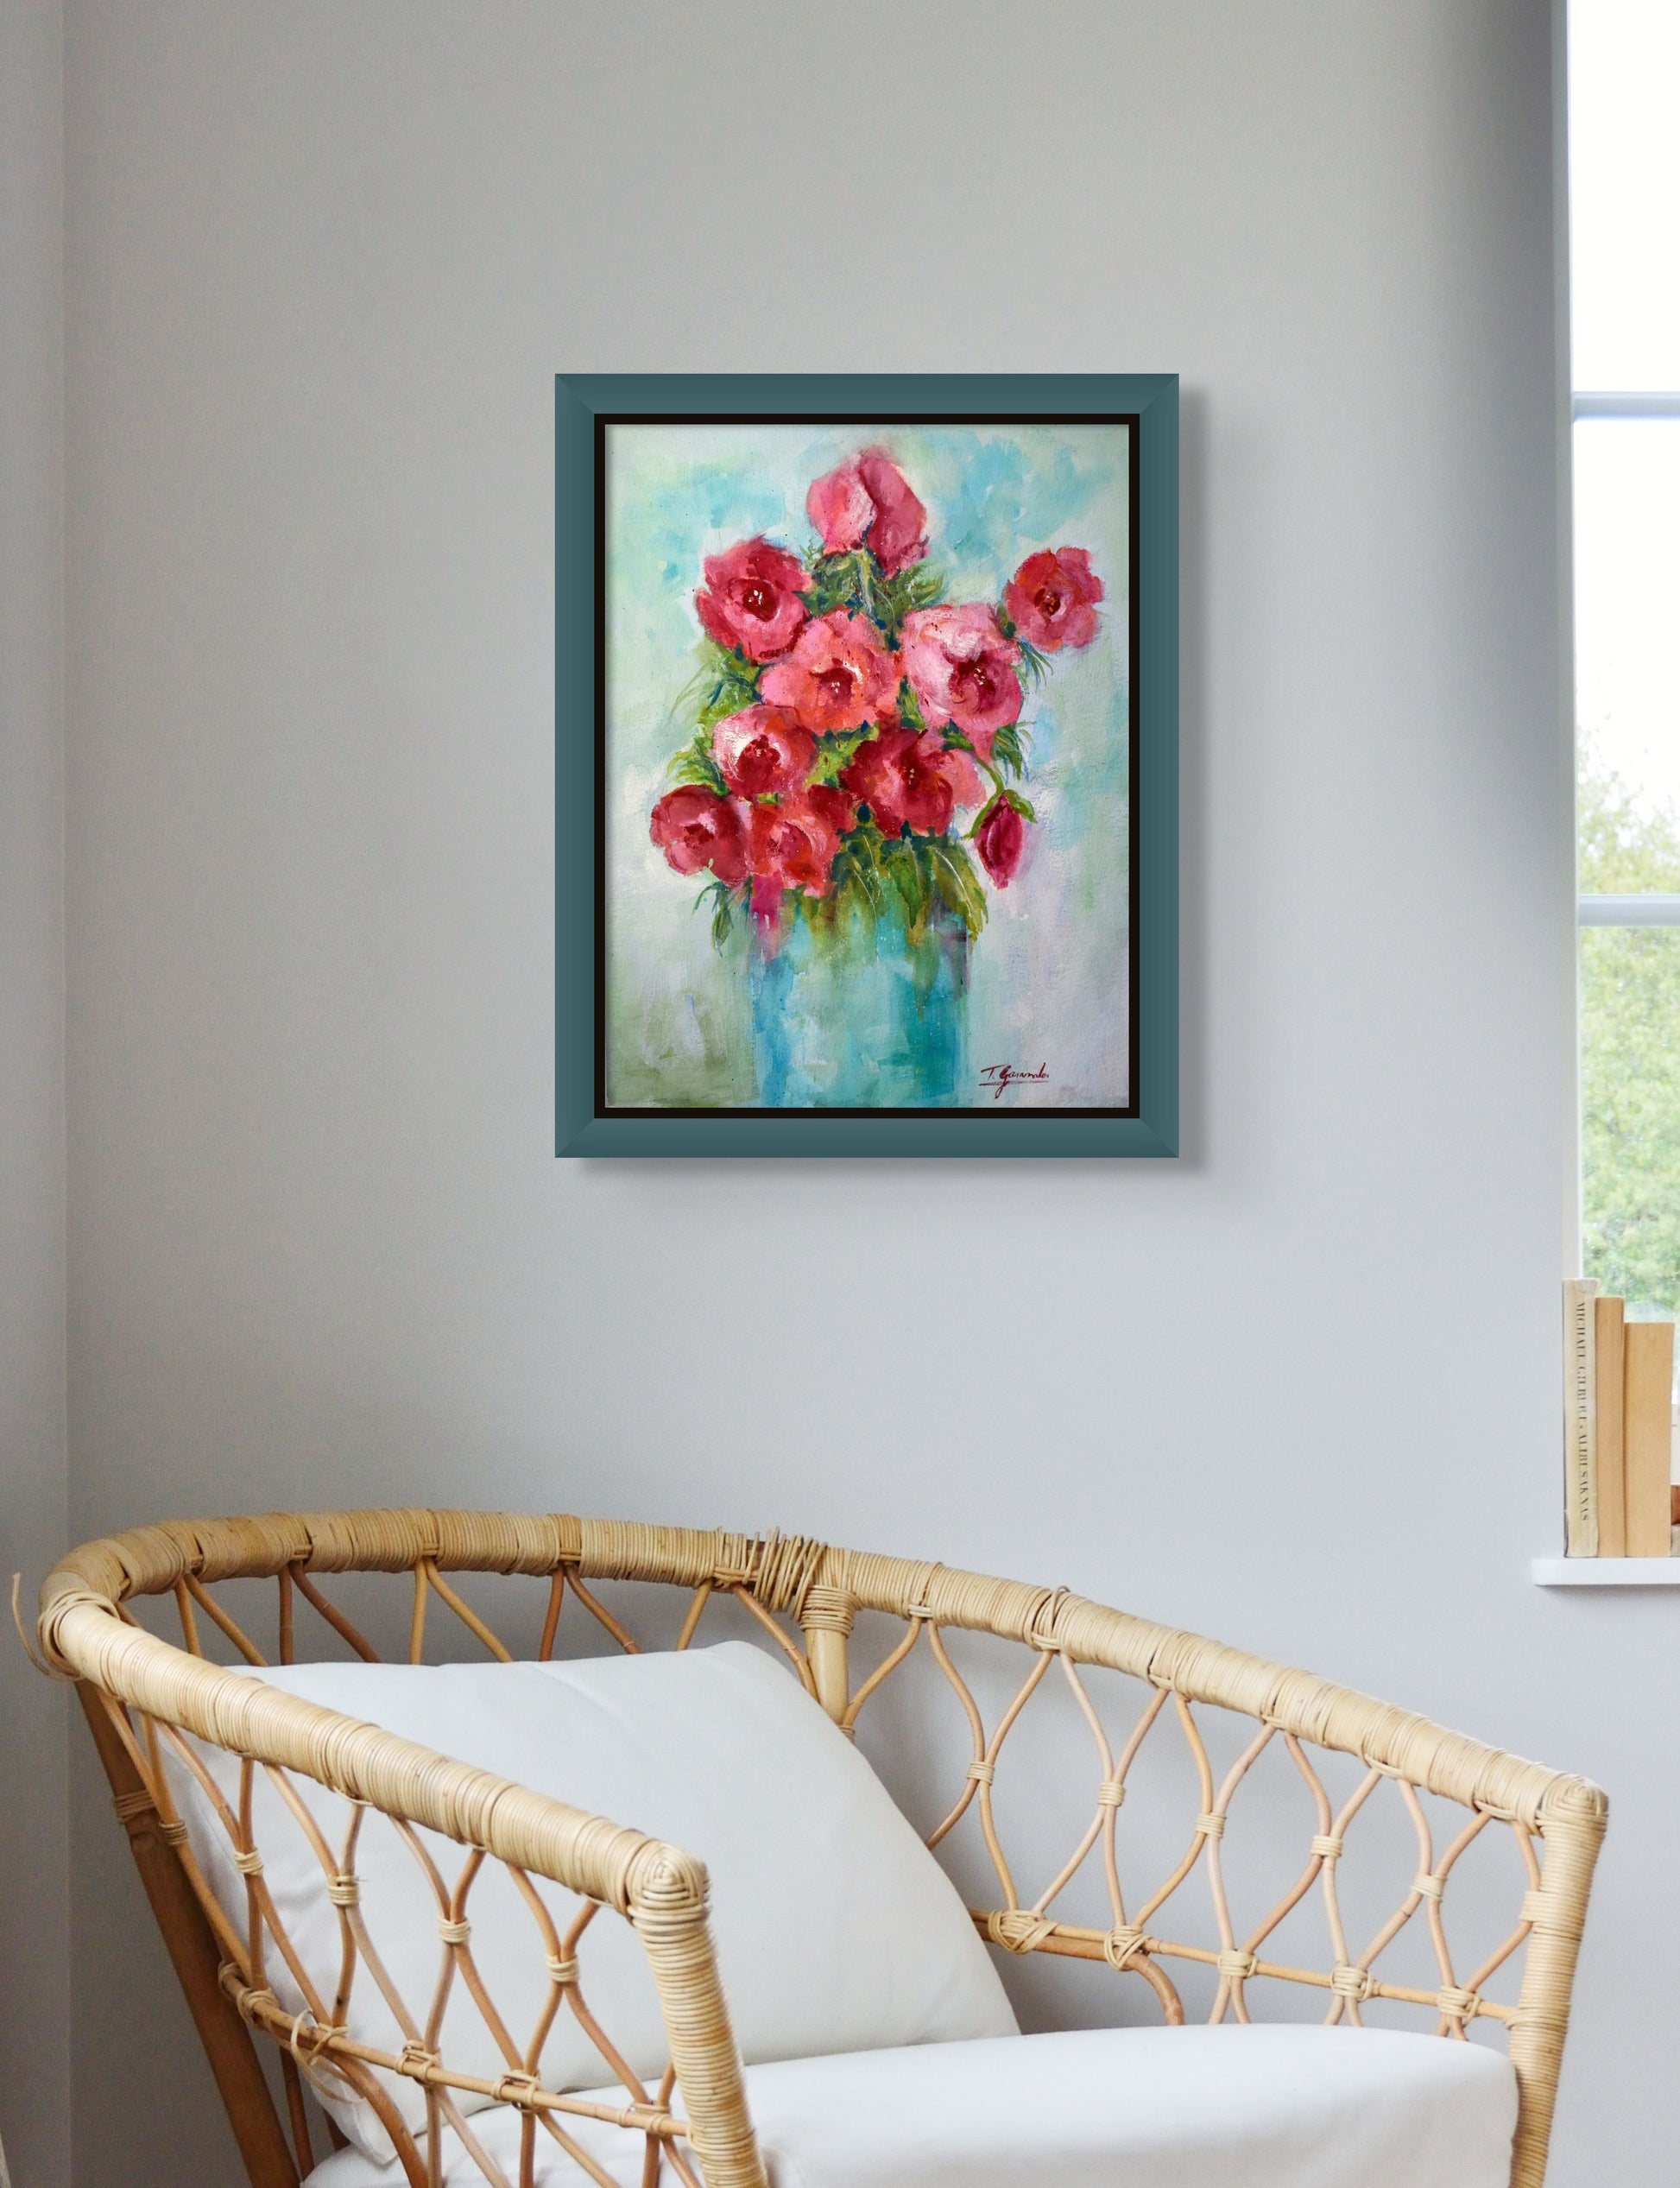 Gouache painting of a teal vase packed full of beautiful pink flowers in various stages of bloom; artist Teri Gammalo; 11"Wx15"H; shown in situ